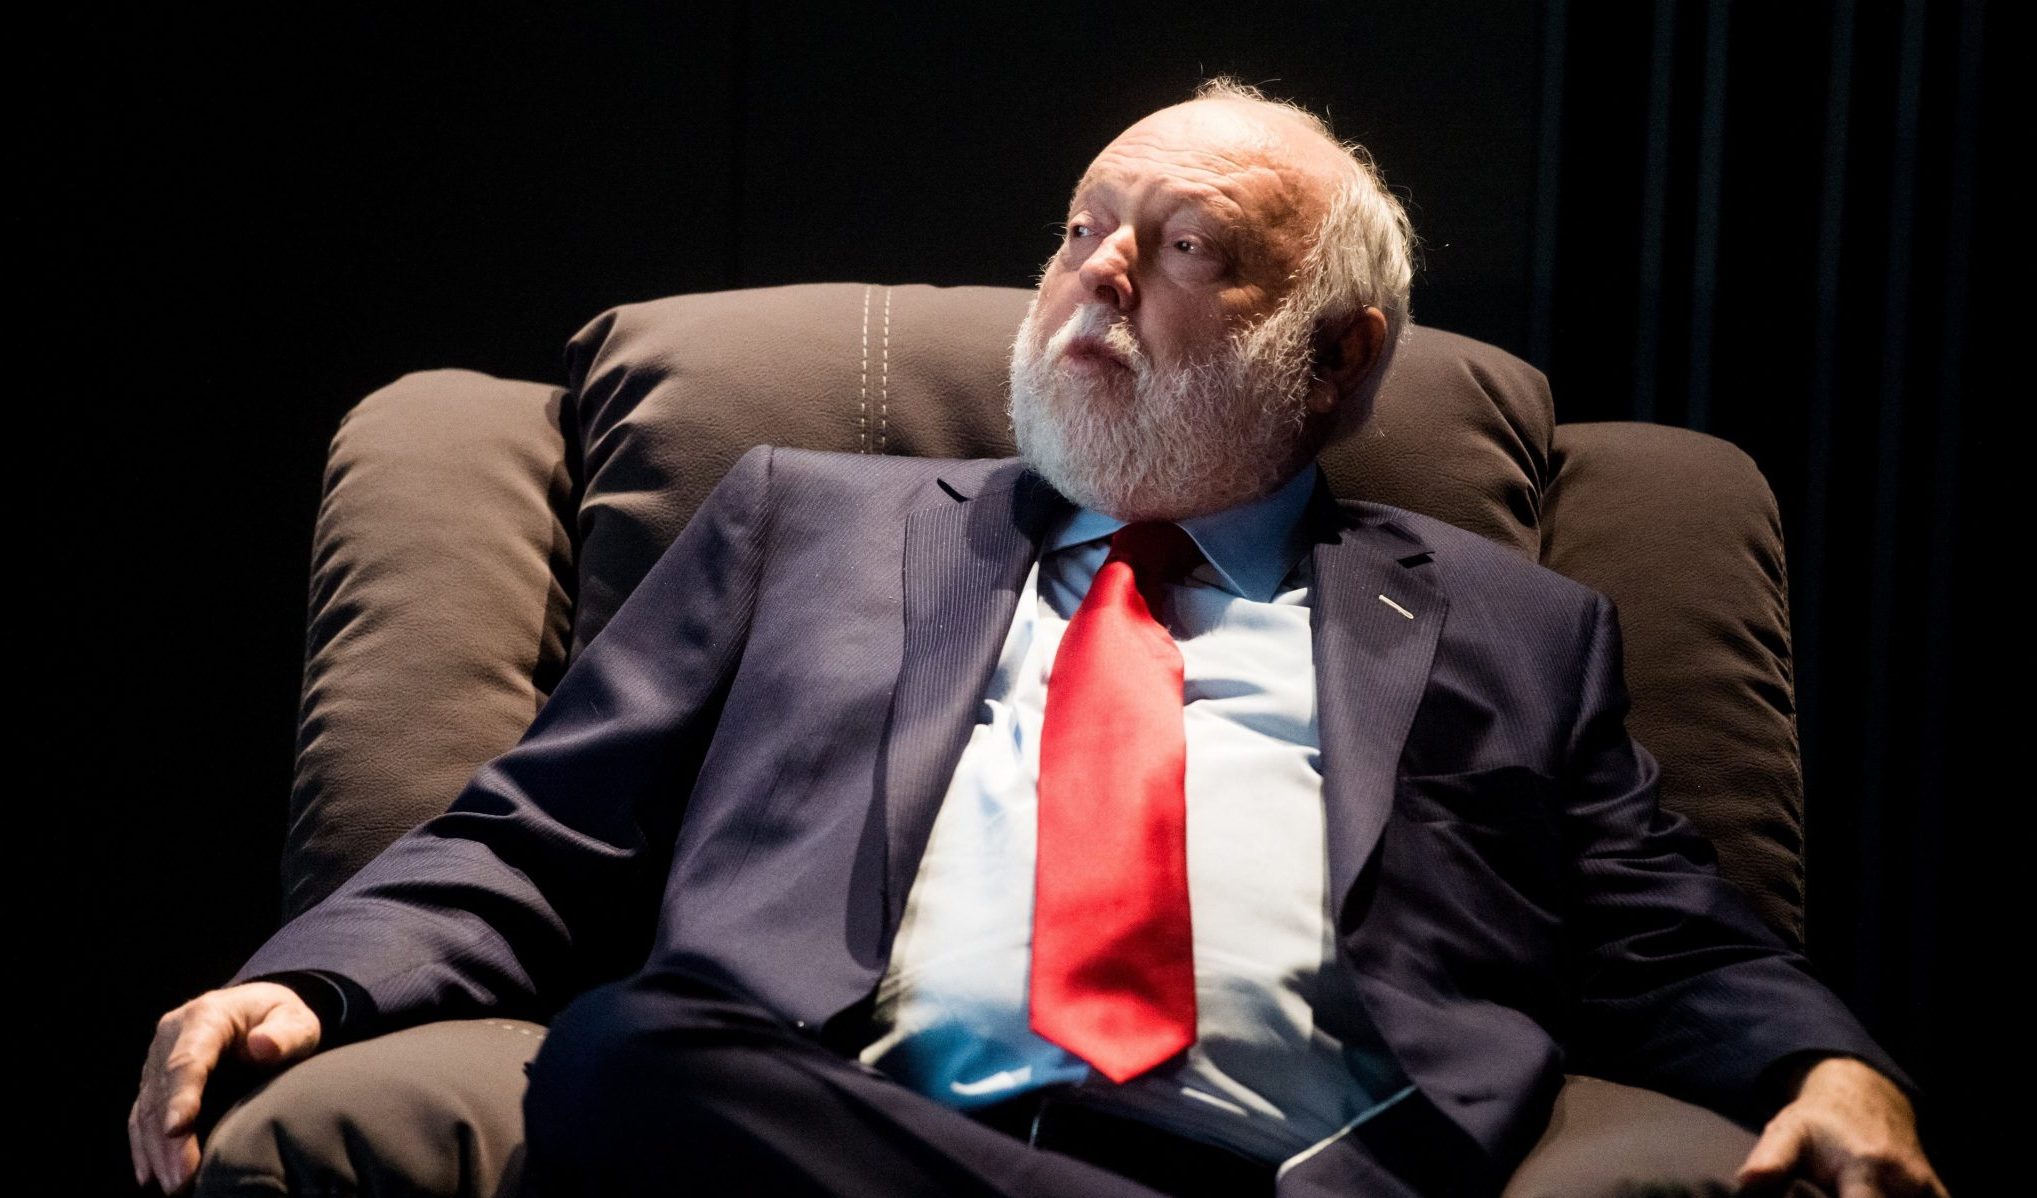 Andy Vajna died